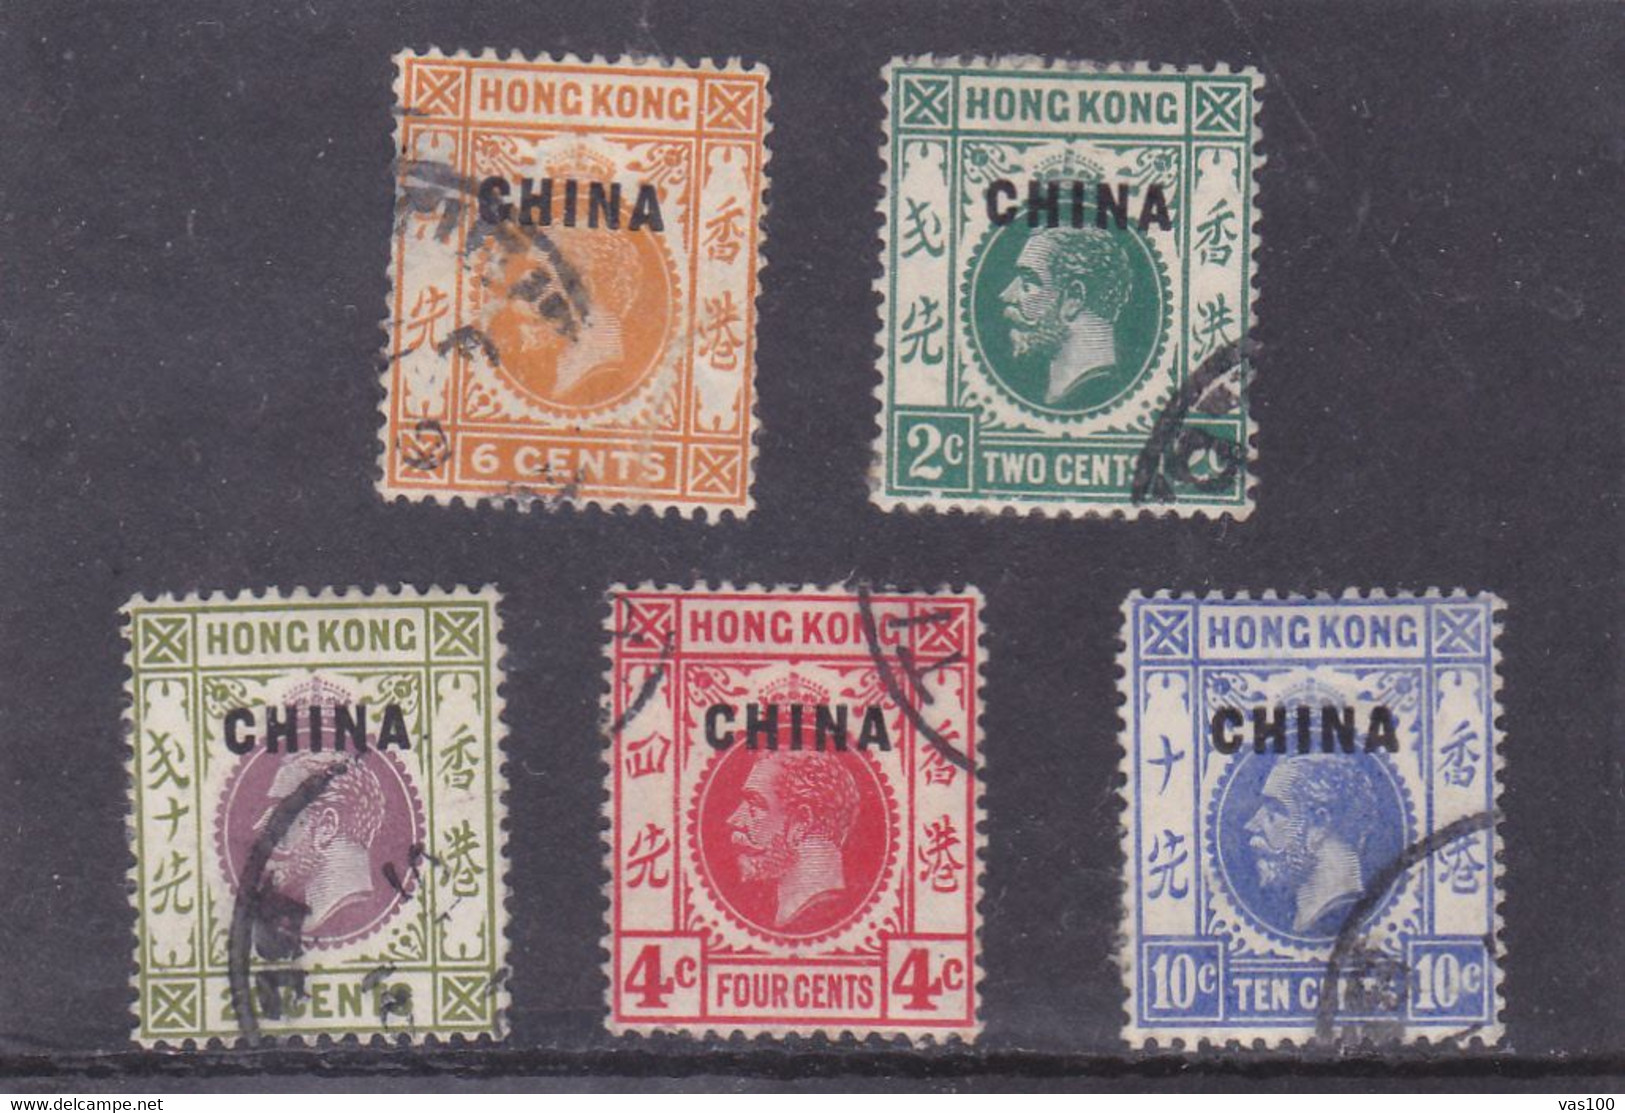 BRITISH P.O.s IN CHINA 1917-21 'CHINA' 5 STAMPS USED - Oblitérés